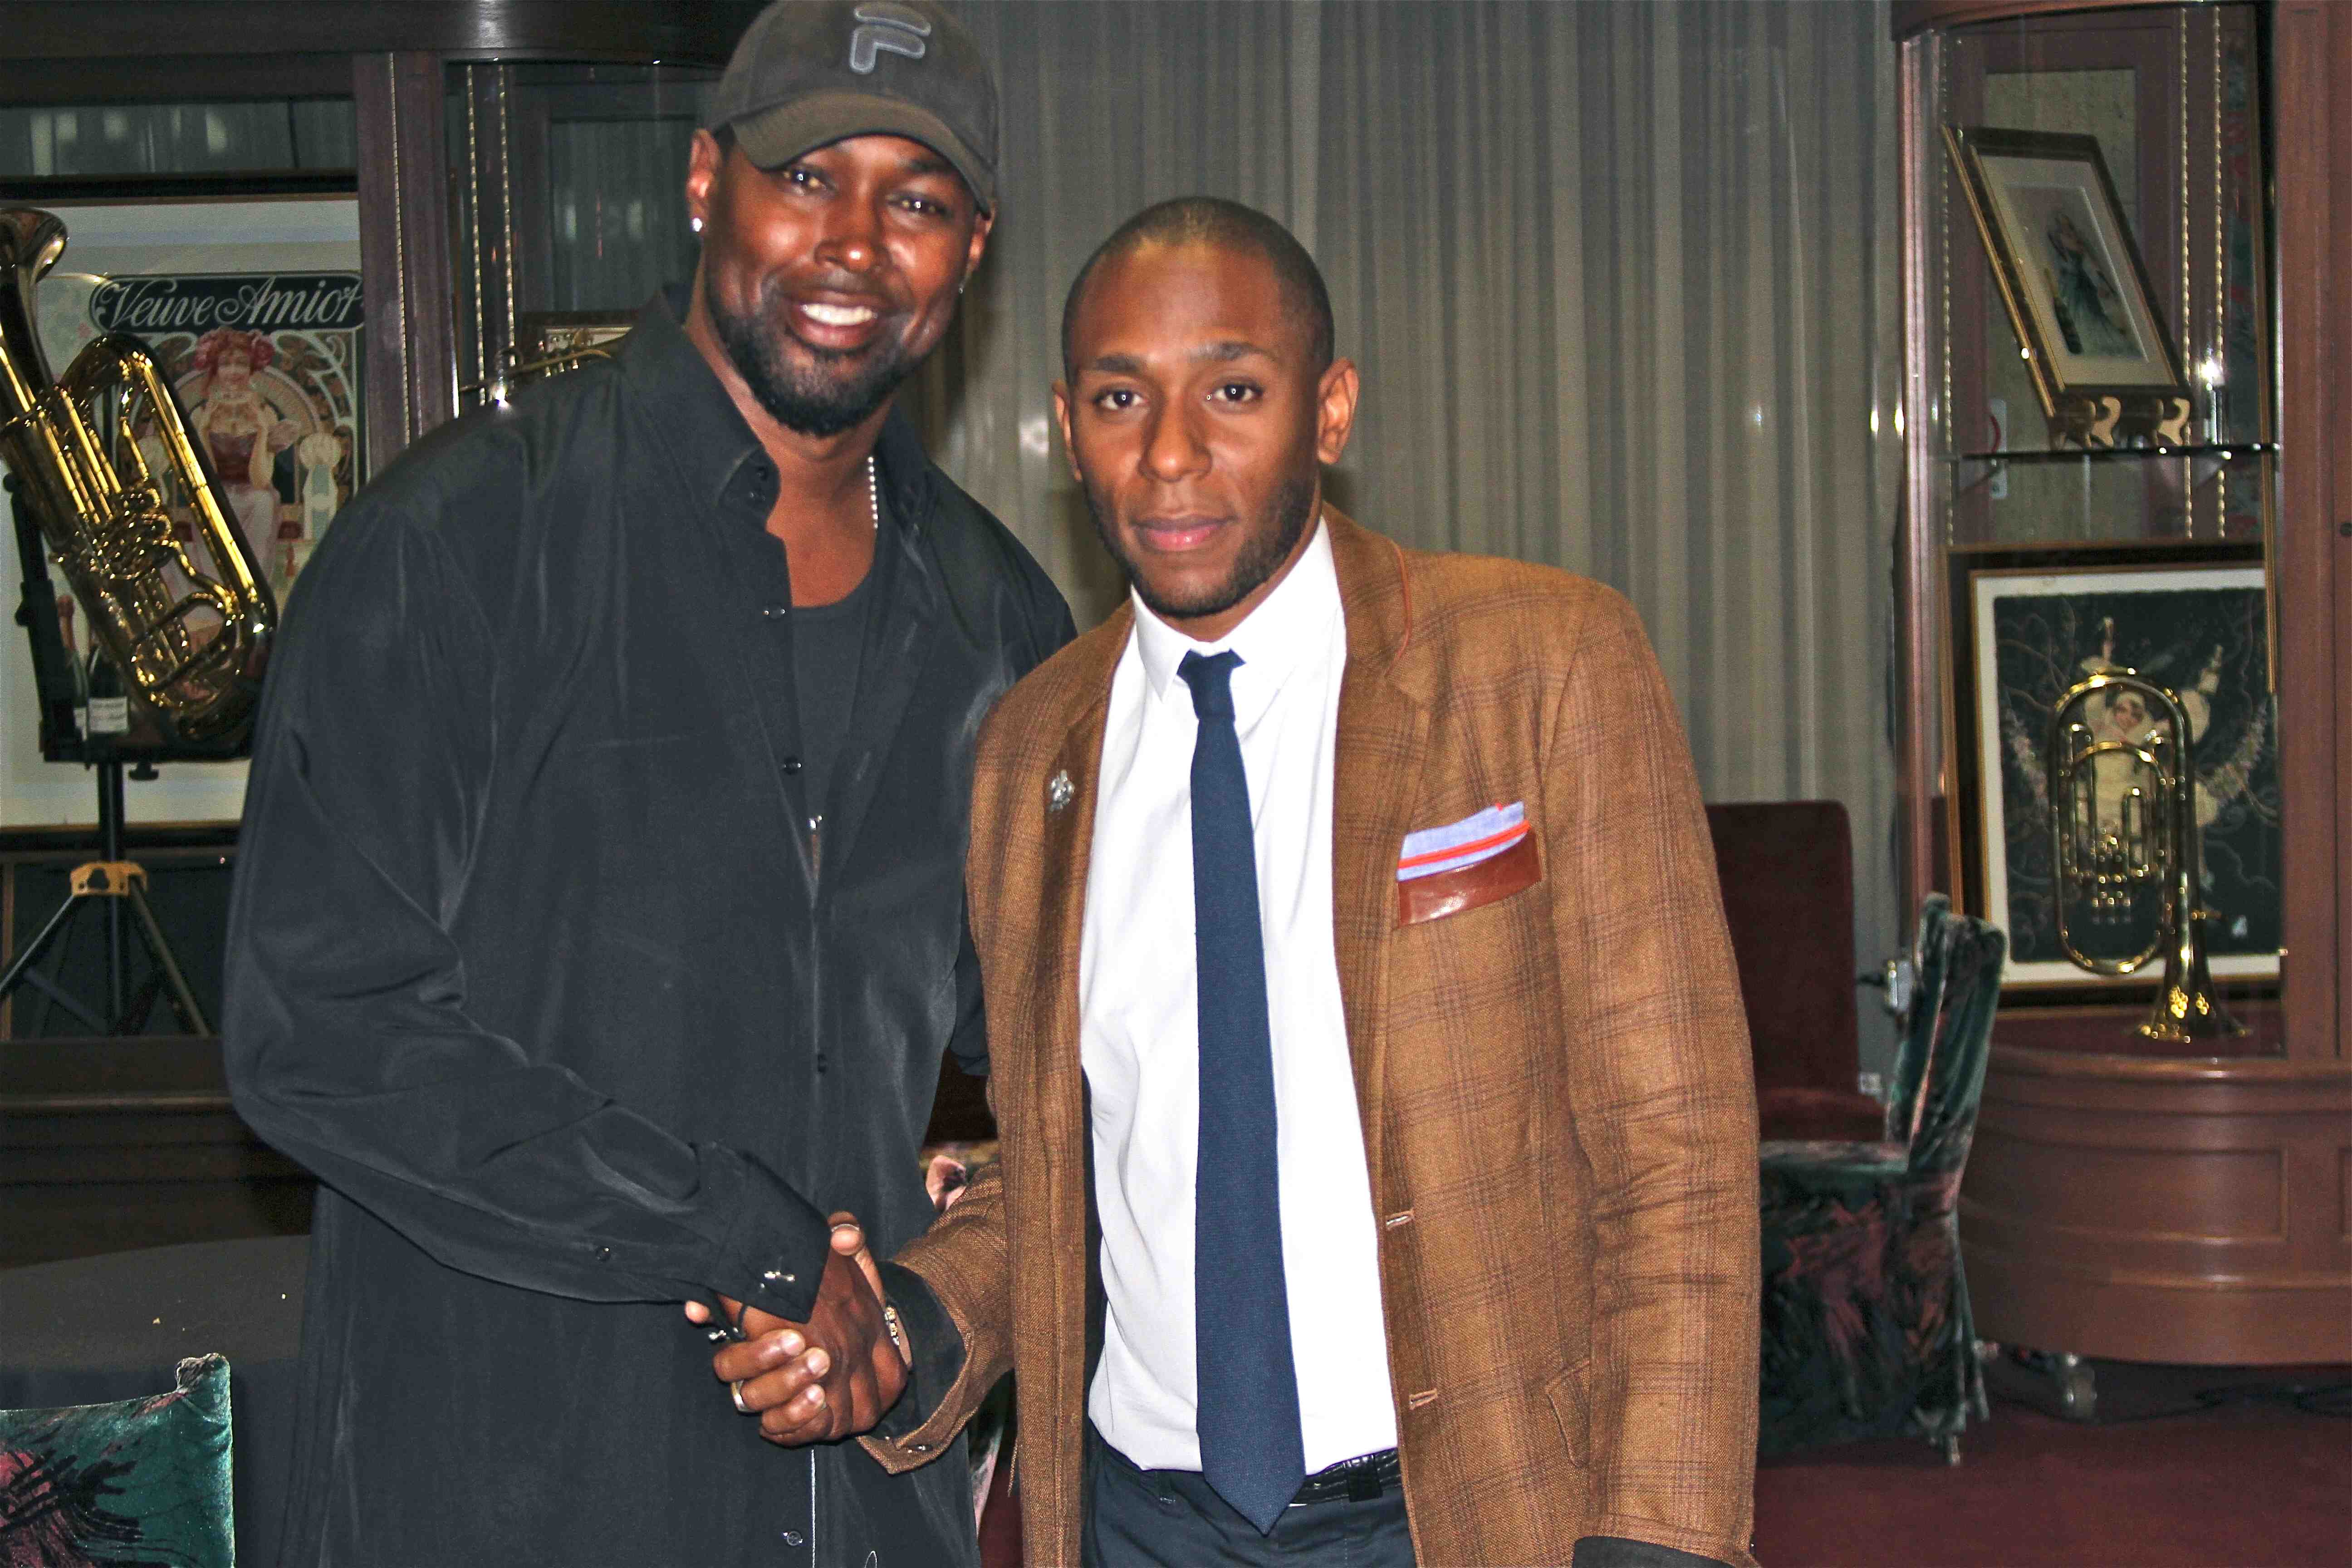 Josef Cannon & Mos Def at the Rehearsal of Leon Ware's upcoming concert @ The Edison in Hollywood California